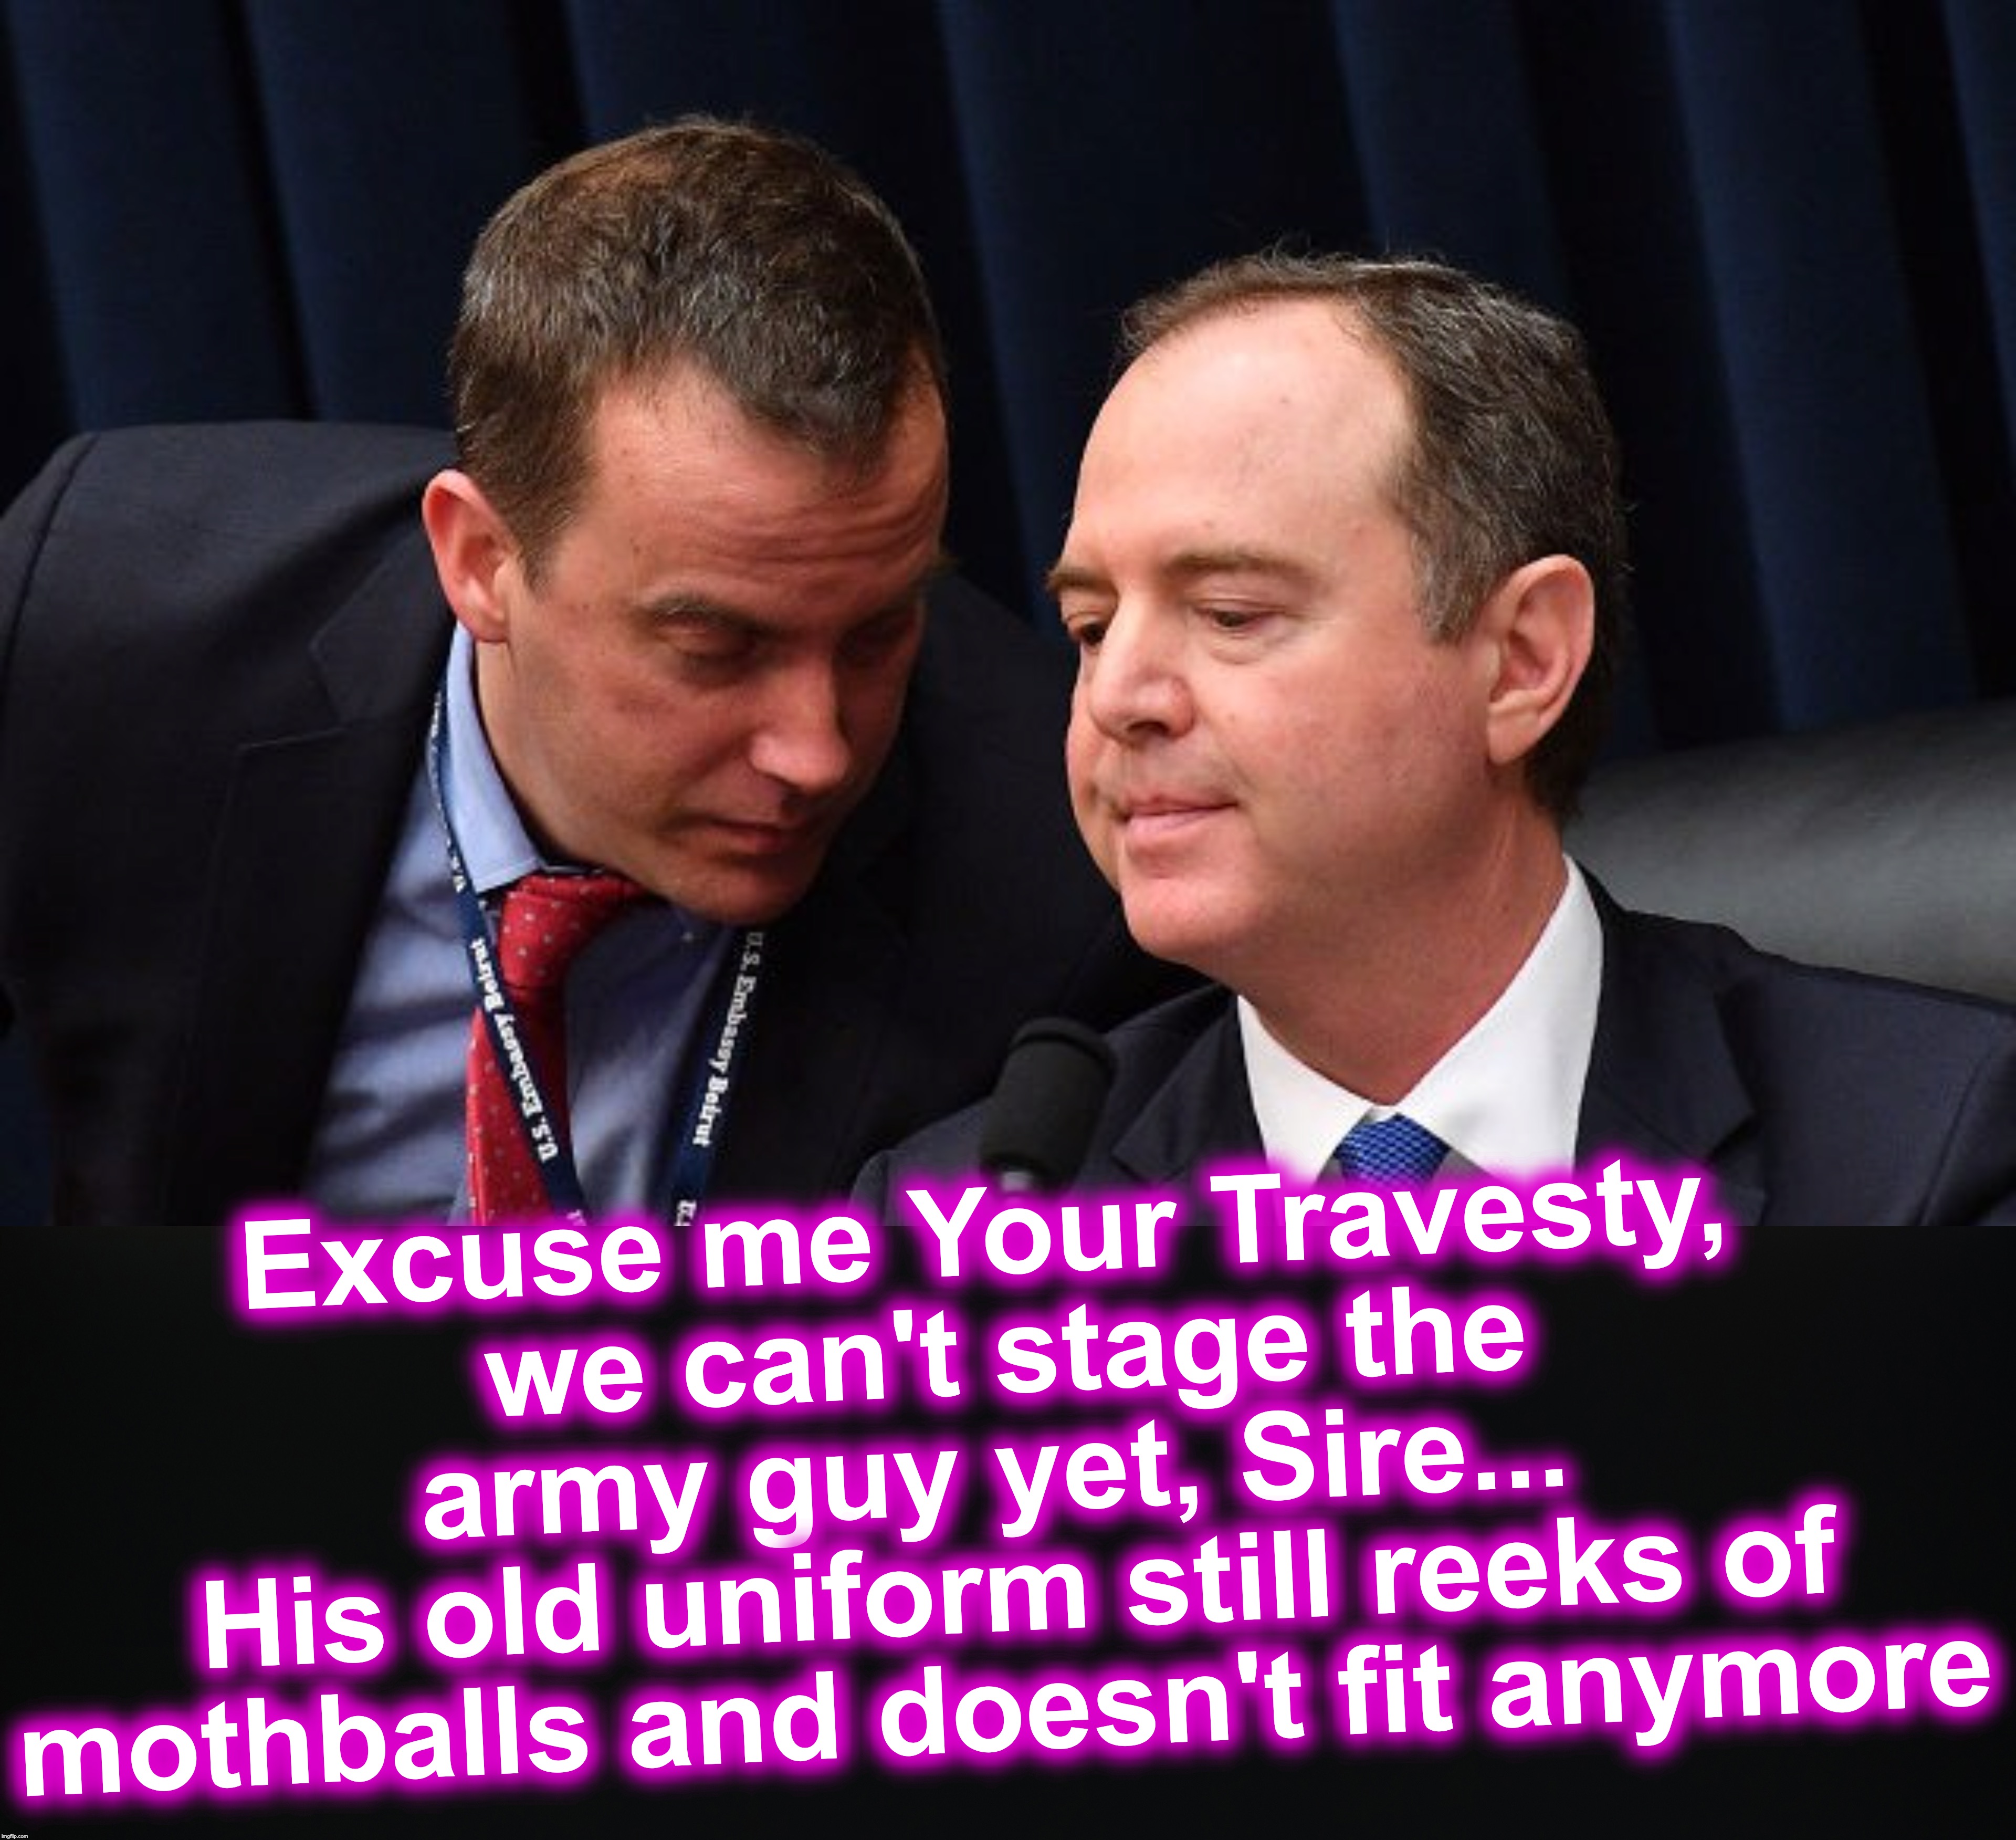 Excuse me Your Travesty,
 we can't stage the army guy yet, Sire...
 His old uniform still reeks of mothballs and doesn't fit anymore | image tagged in adam schiff and aide,corrupt | made w/ Imgflip meme maker